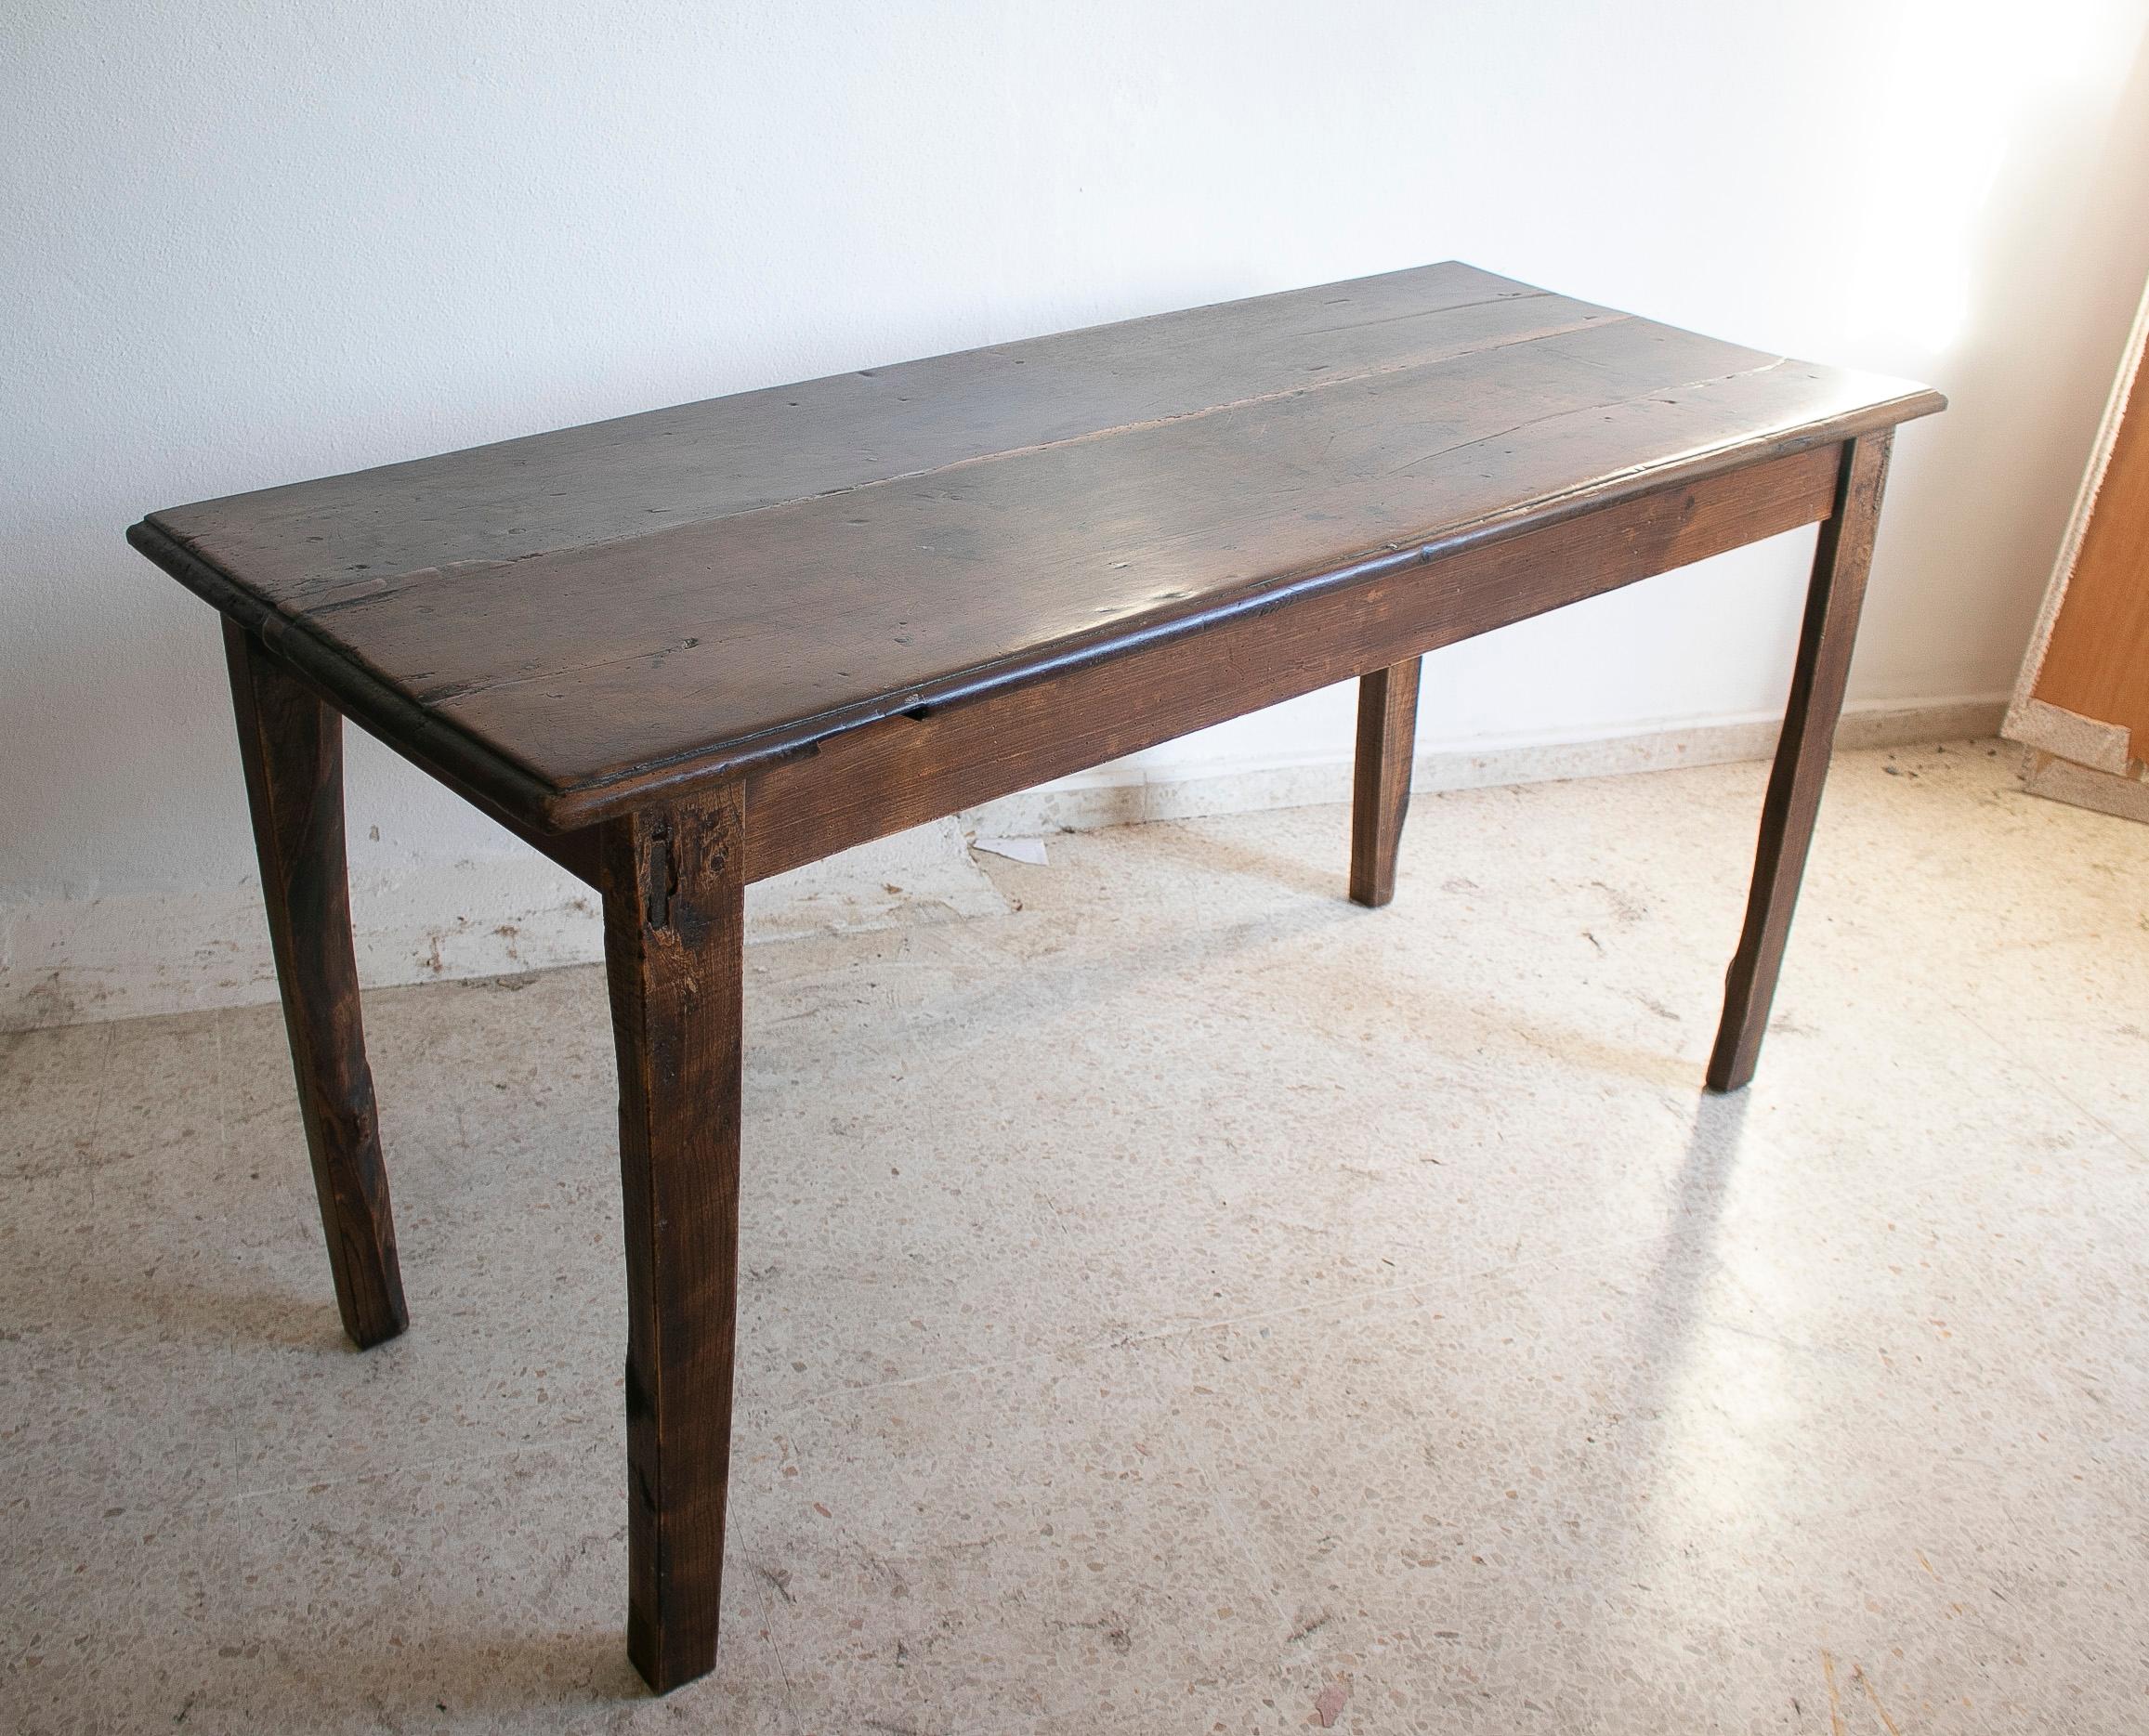 Rustic 1930s Spanish wooden farmhouse table.